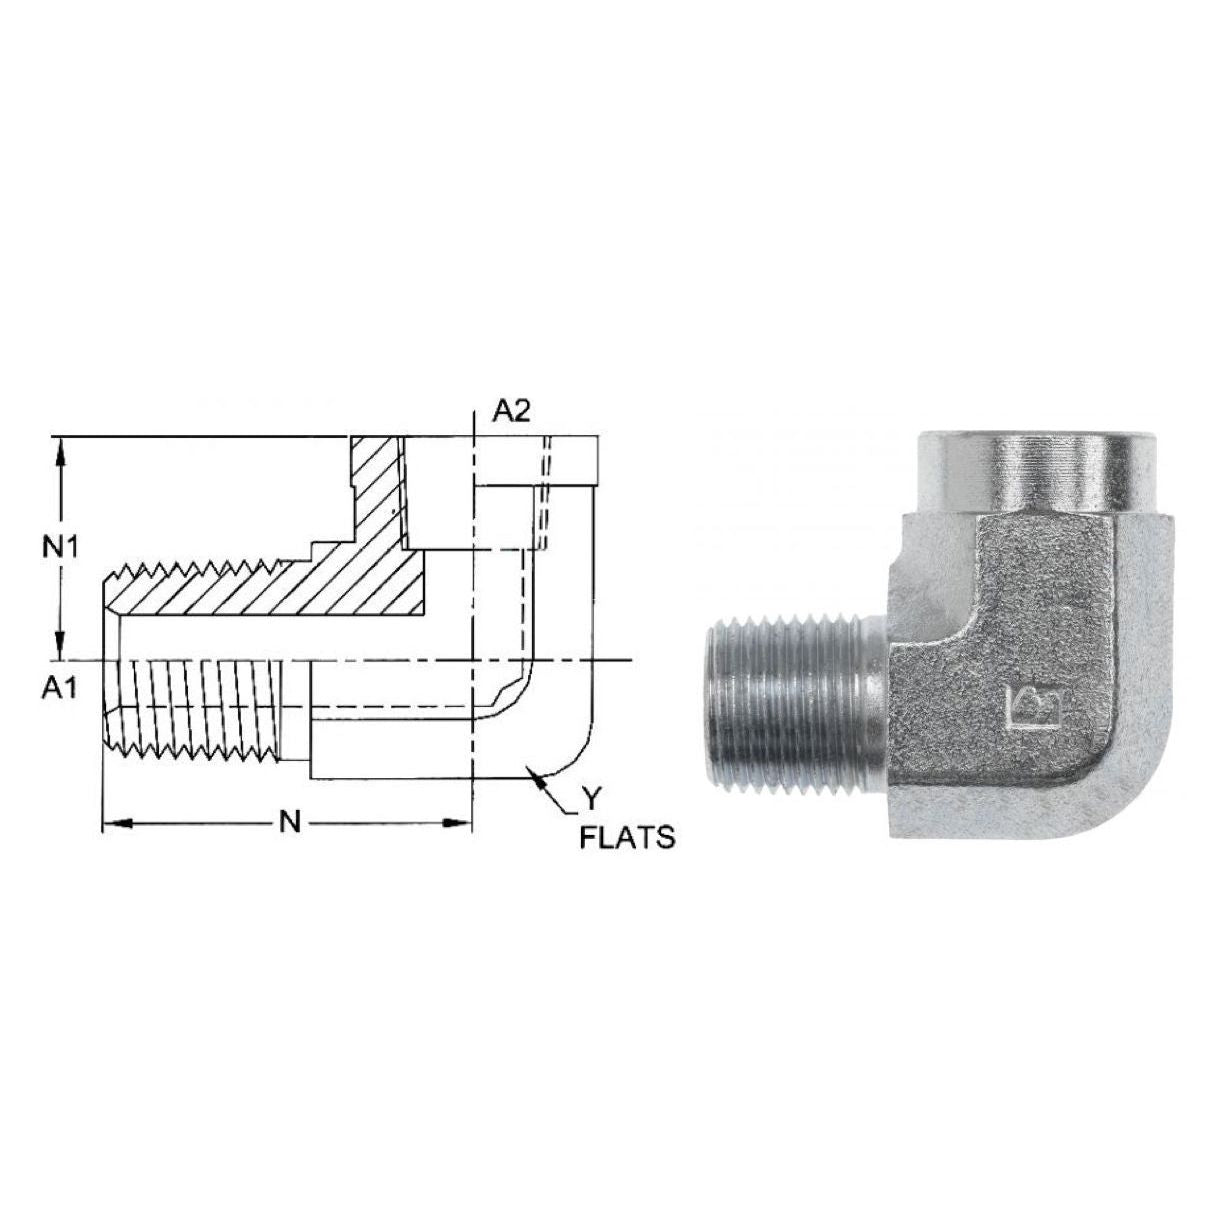 5502-08-08-SS : OneHydraulics 90-Degree Street Elbow, 0.5 (1/2) Male NPT x 0.5 (1/2) Female NPT, Stainless Steel, 6000psi